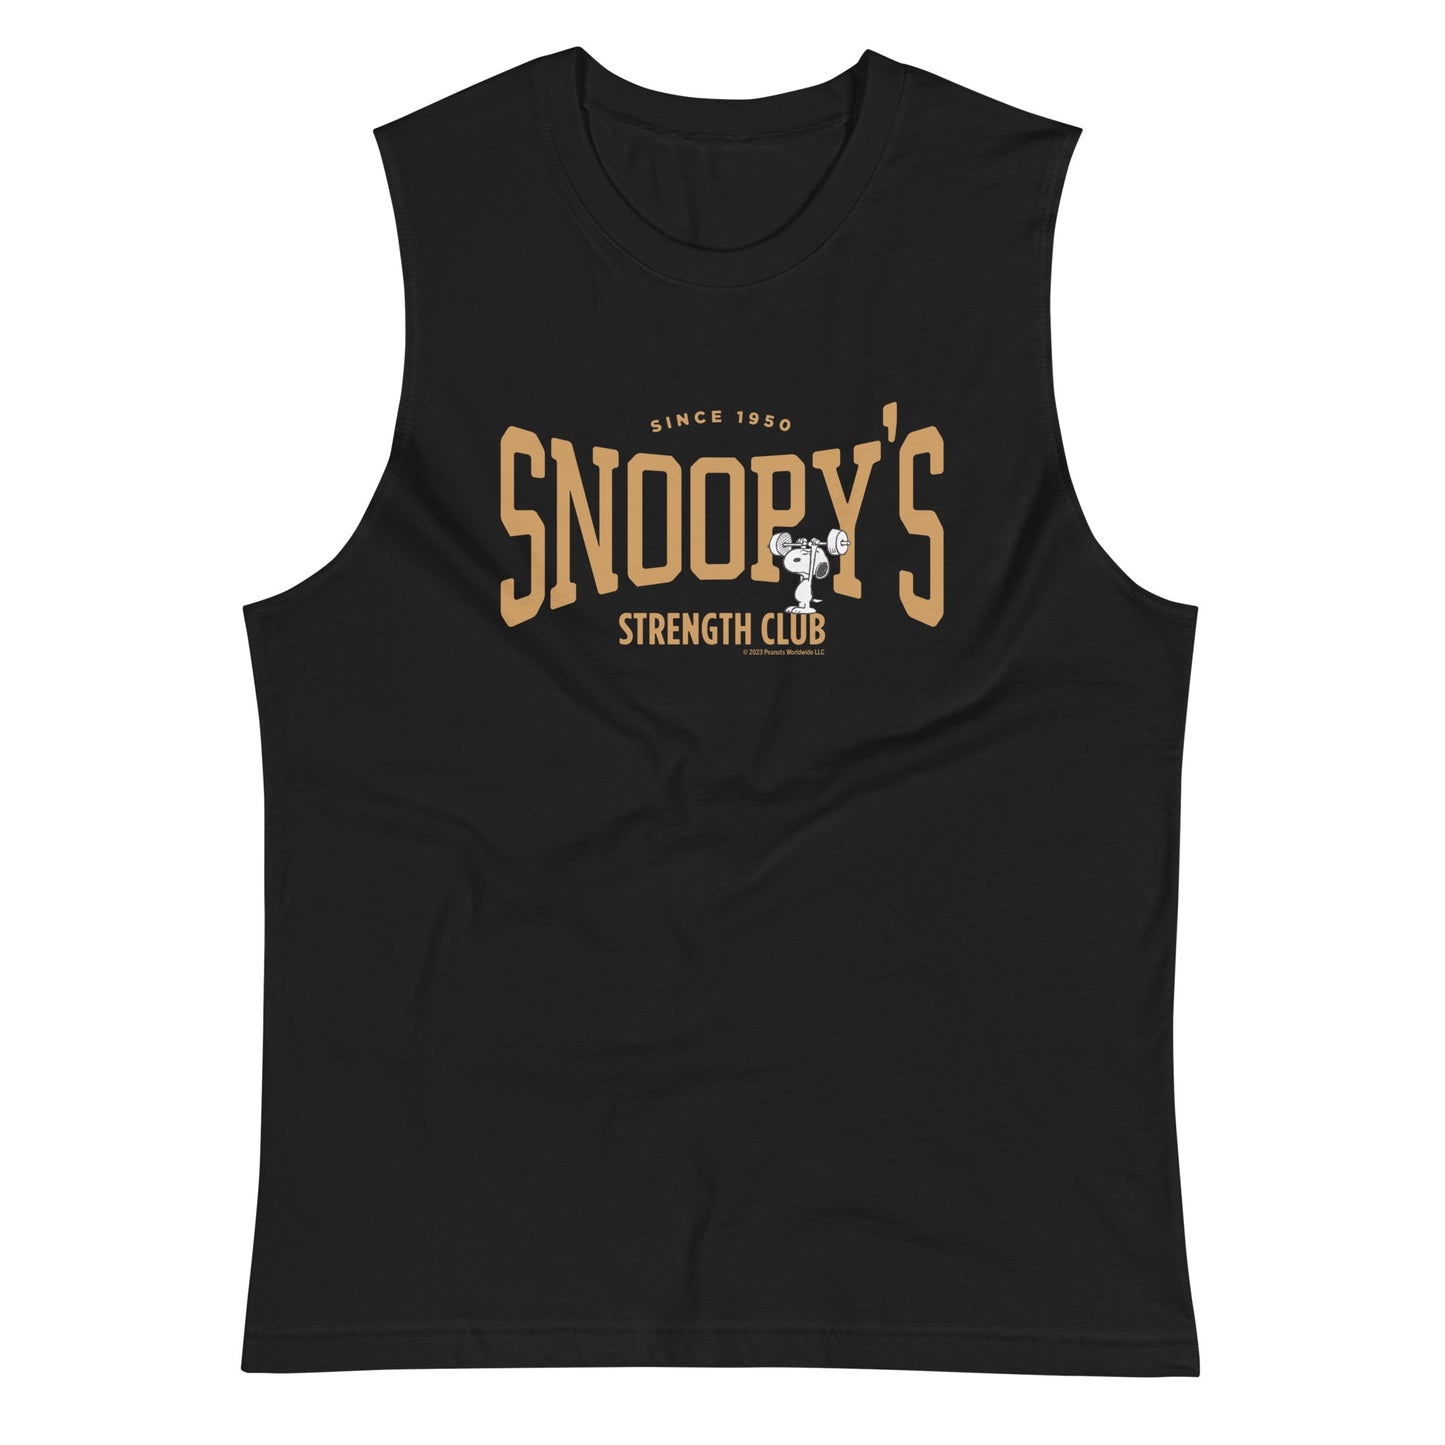 Snoopy's Strength Club Muscle Shirt